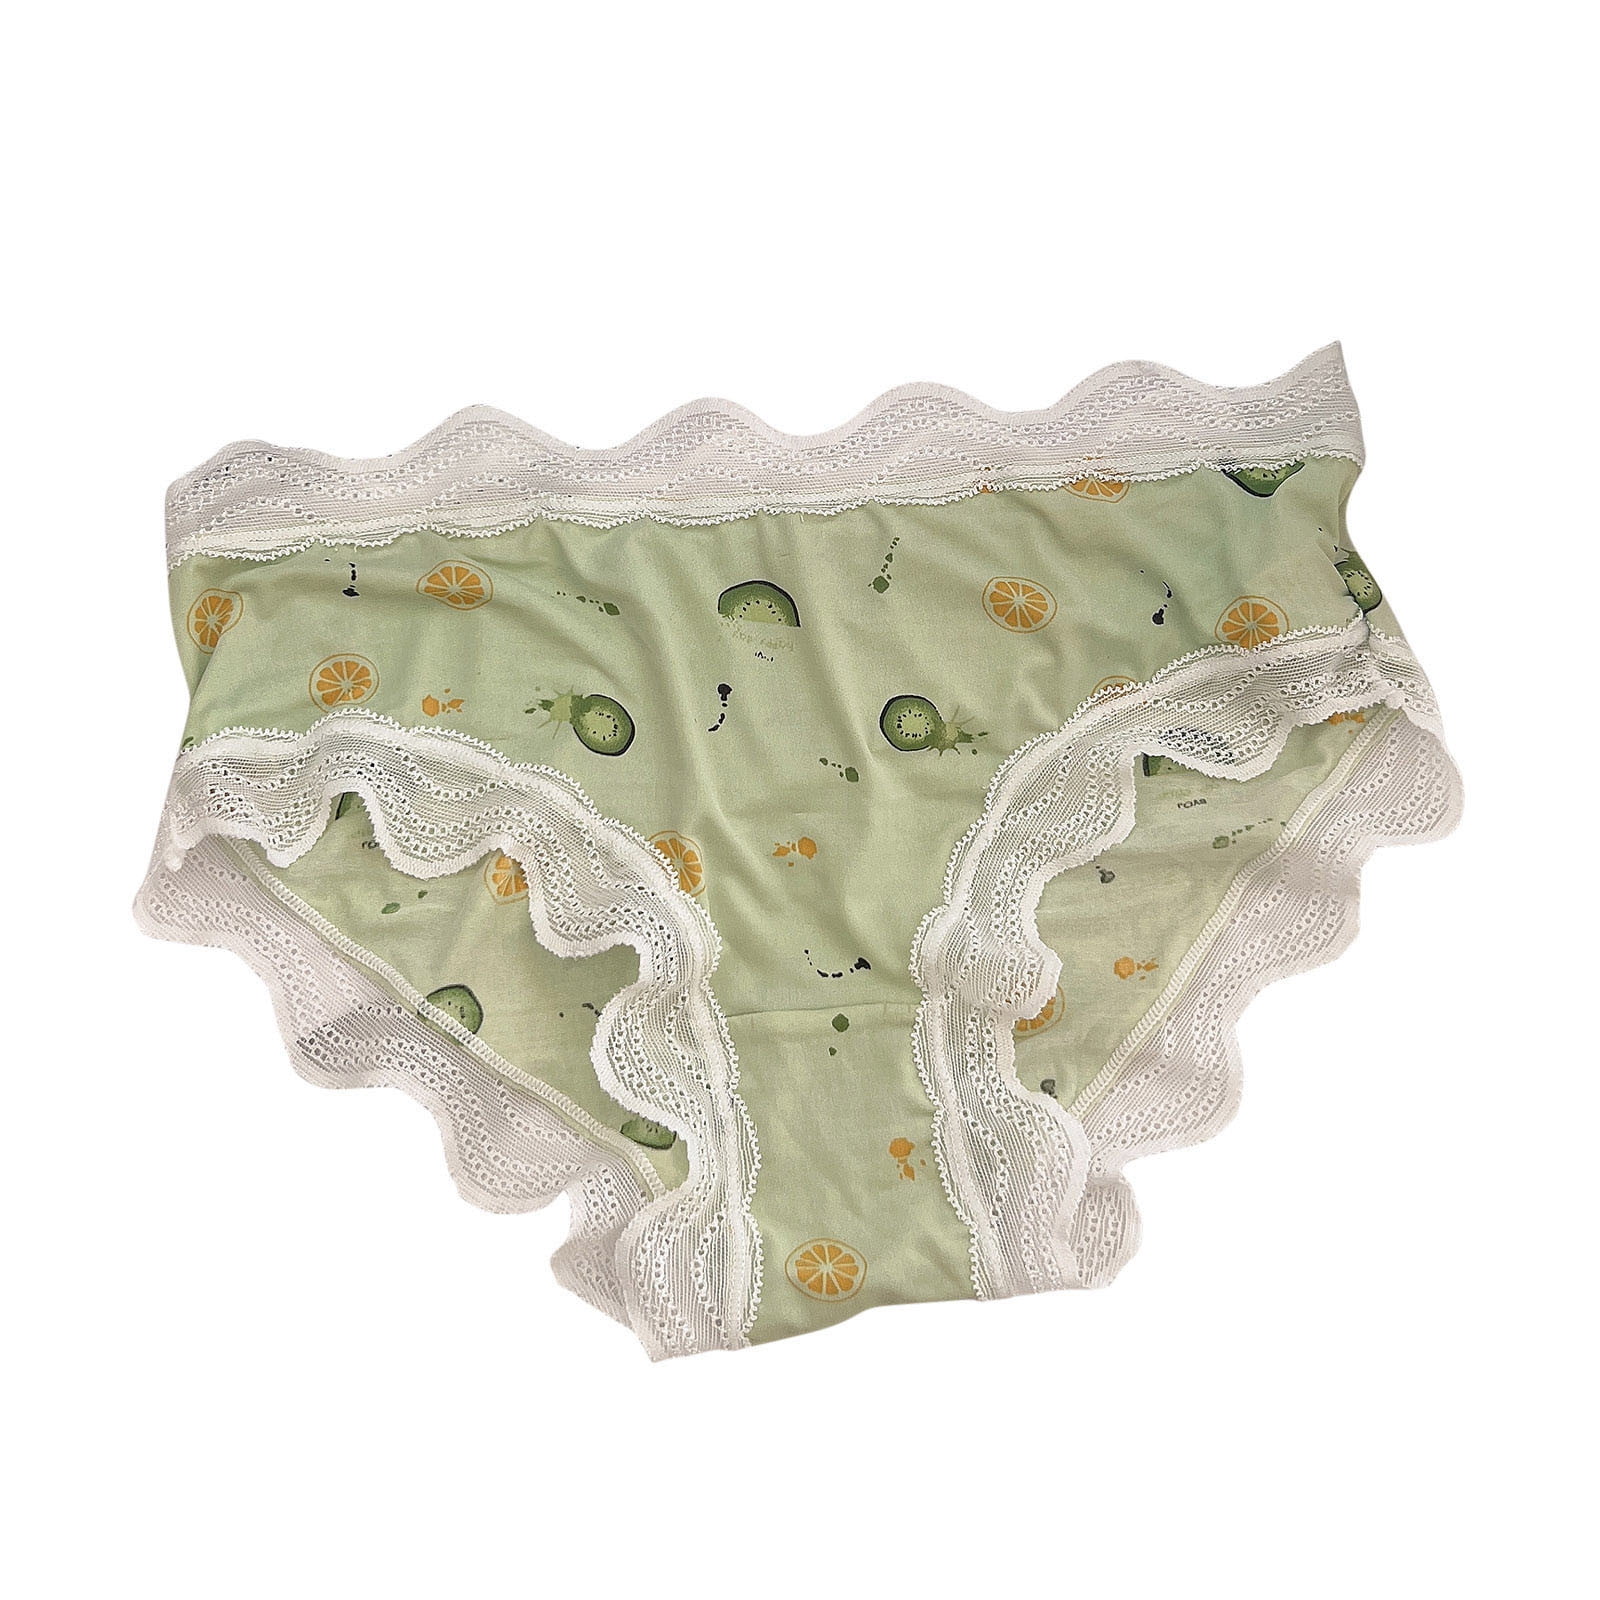 Homadles Womens Lingerie Comfort Panty- Printed Cute Sexy